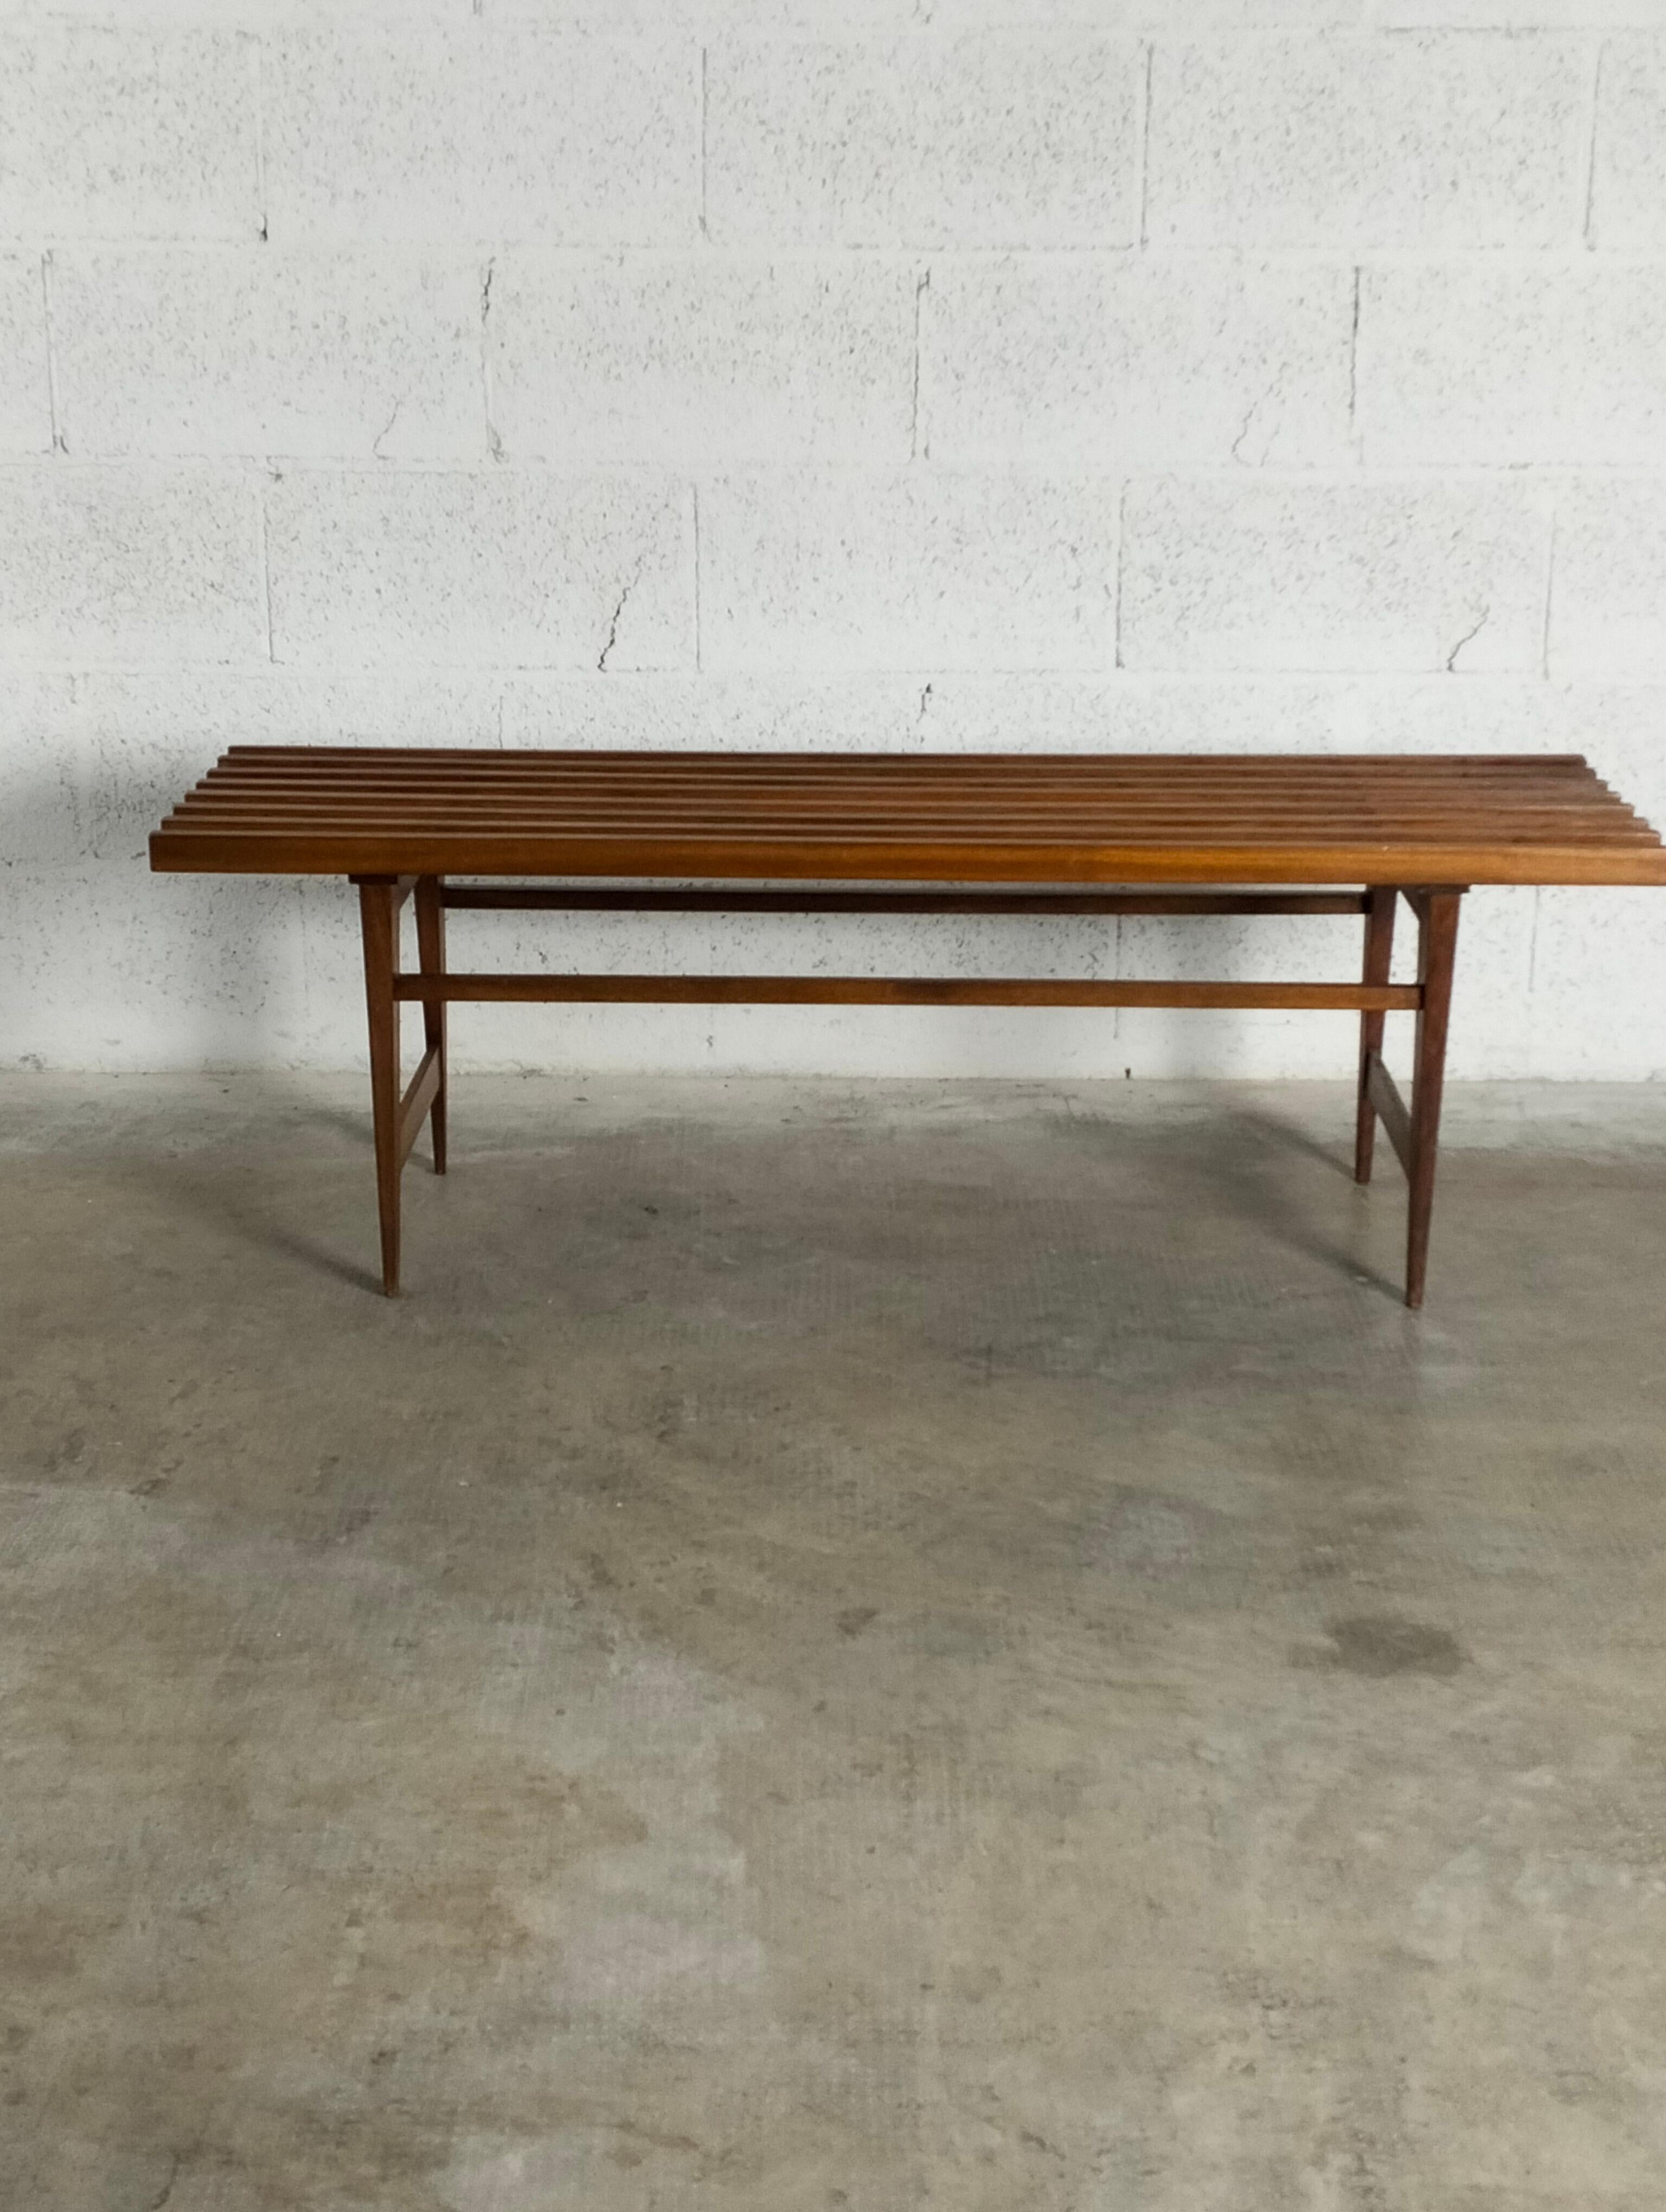 Italian Nordic Scandinavian Style Teak Bench from the 1960s For Sale